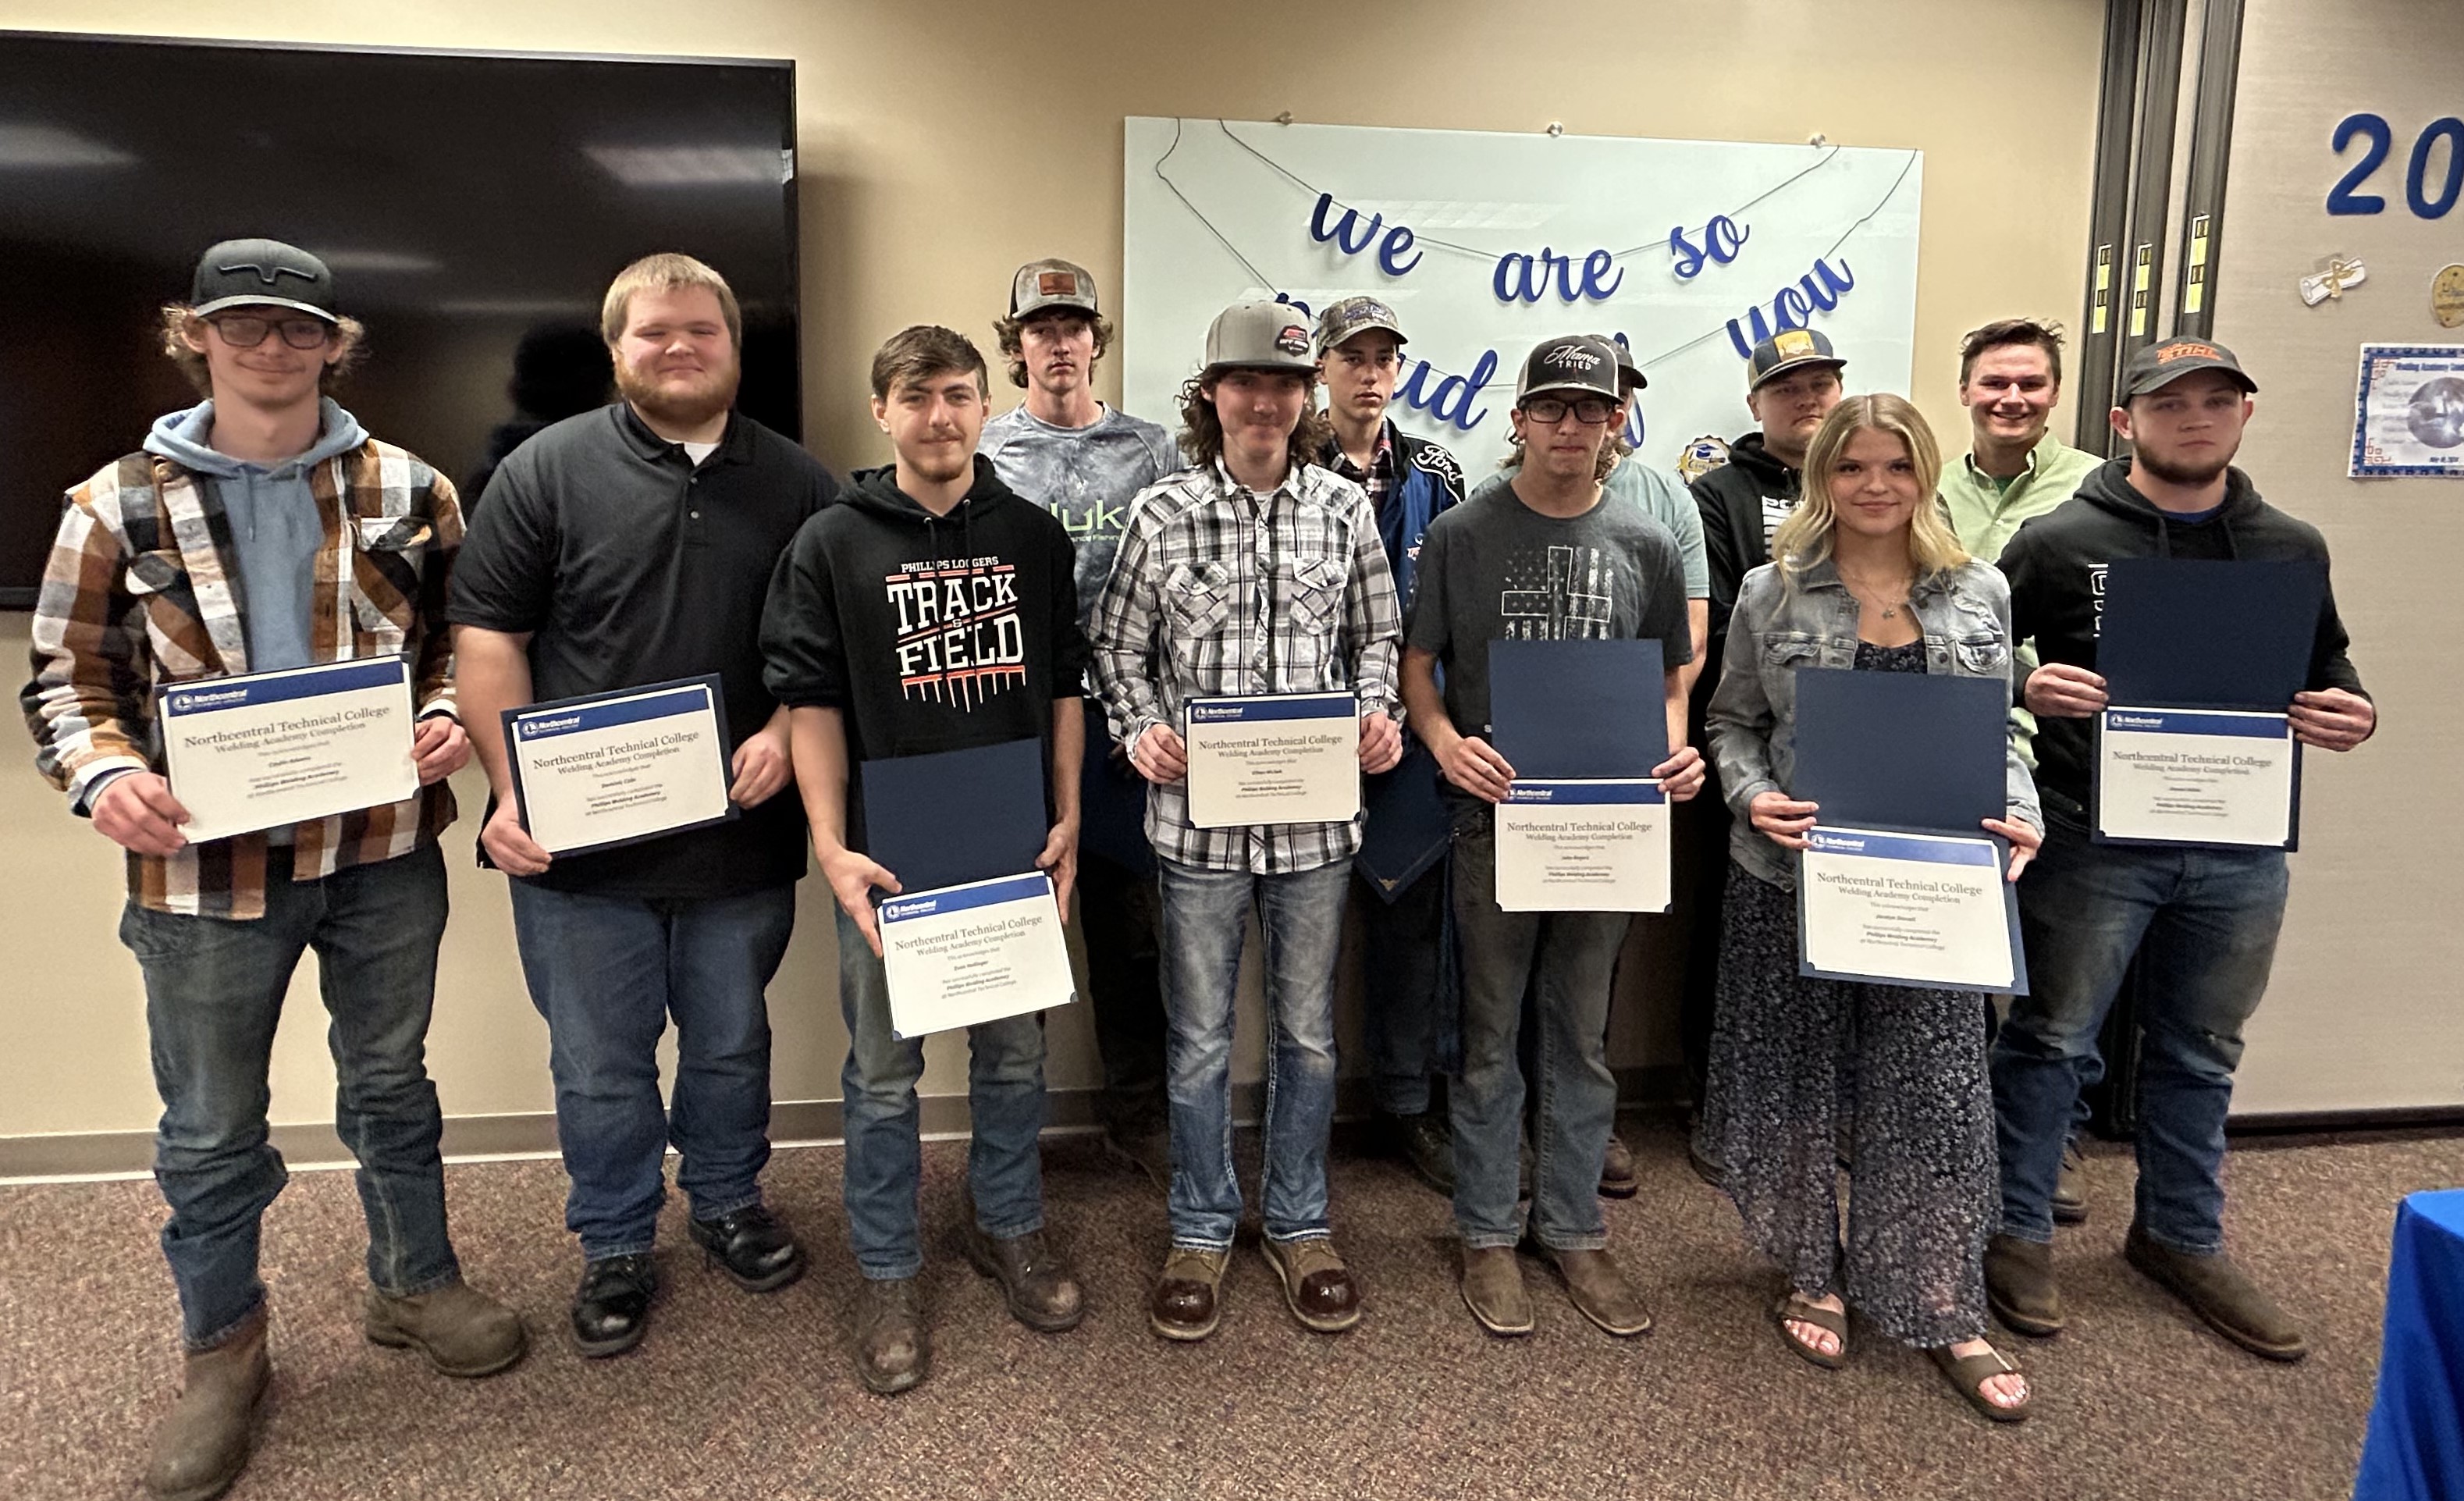 Phillips Welding Academy students posing with their completion certificates.